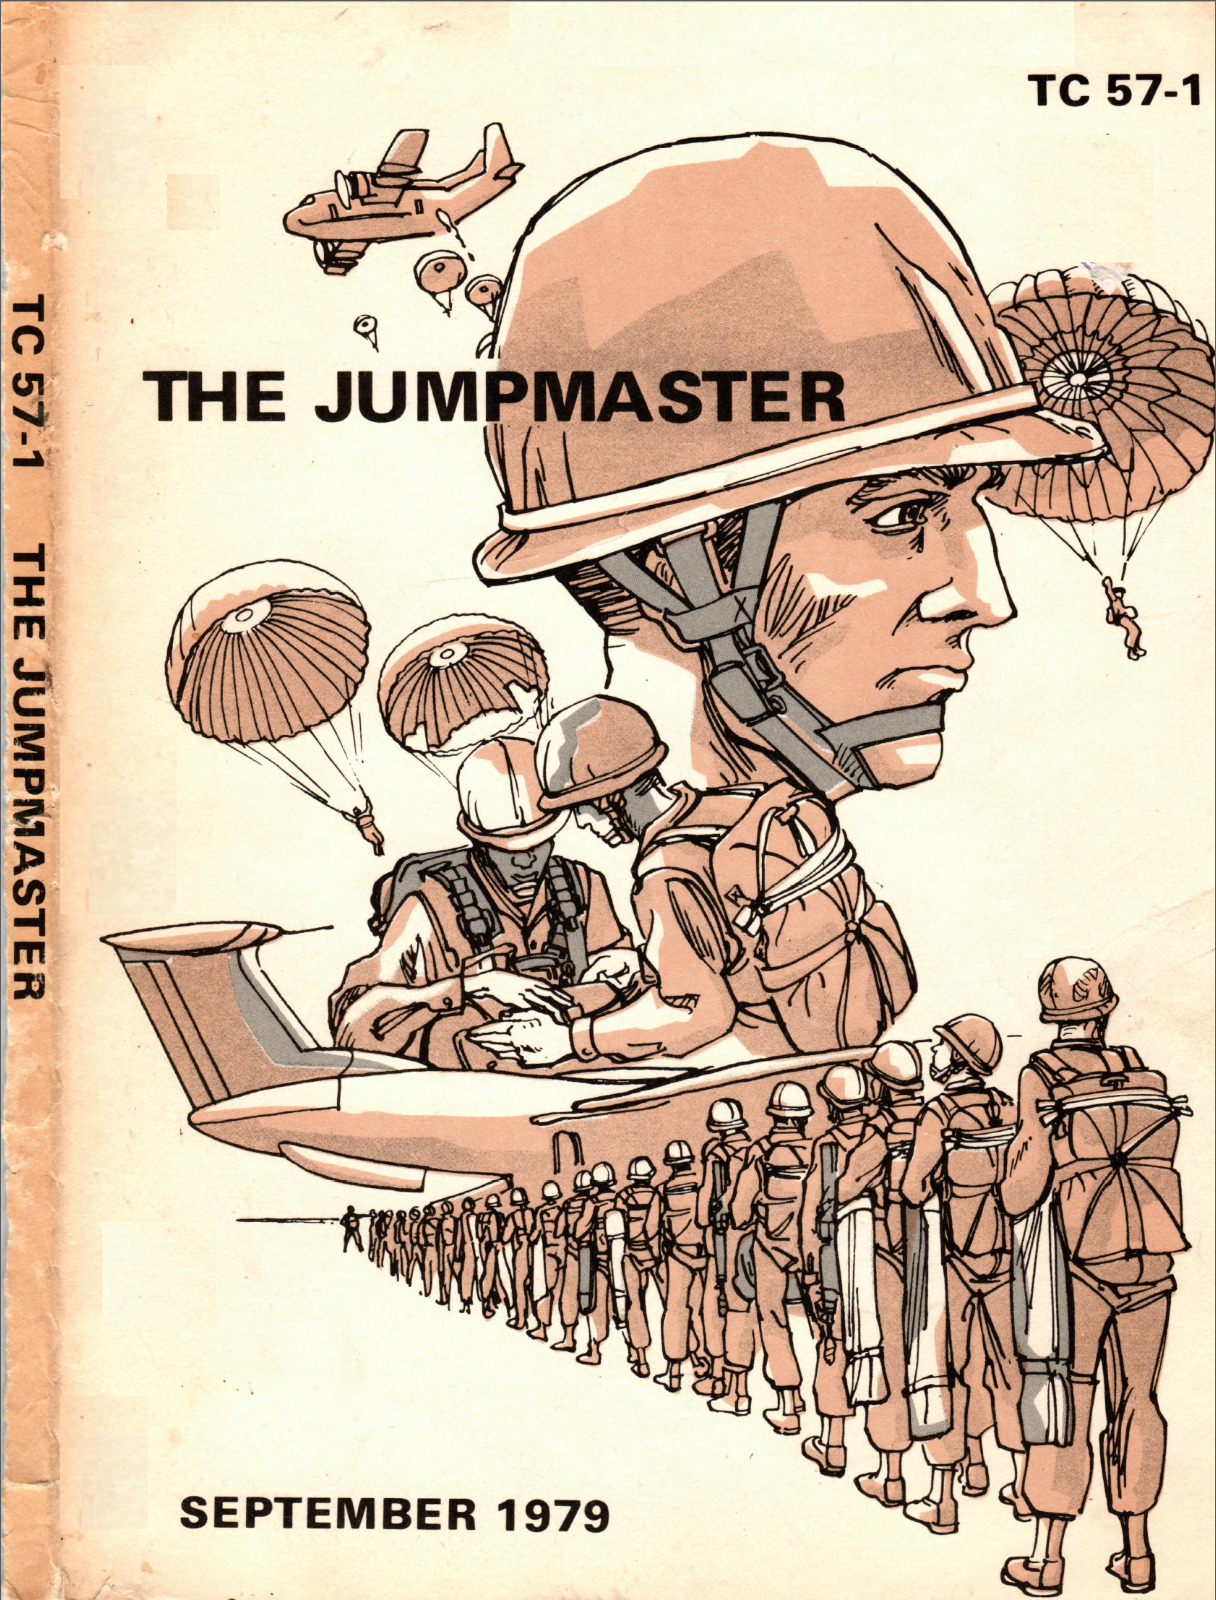 168 Page TC 57-1 1979 THE JUMPMASTER Airborne Parachute Operations on Data CD